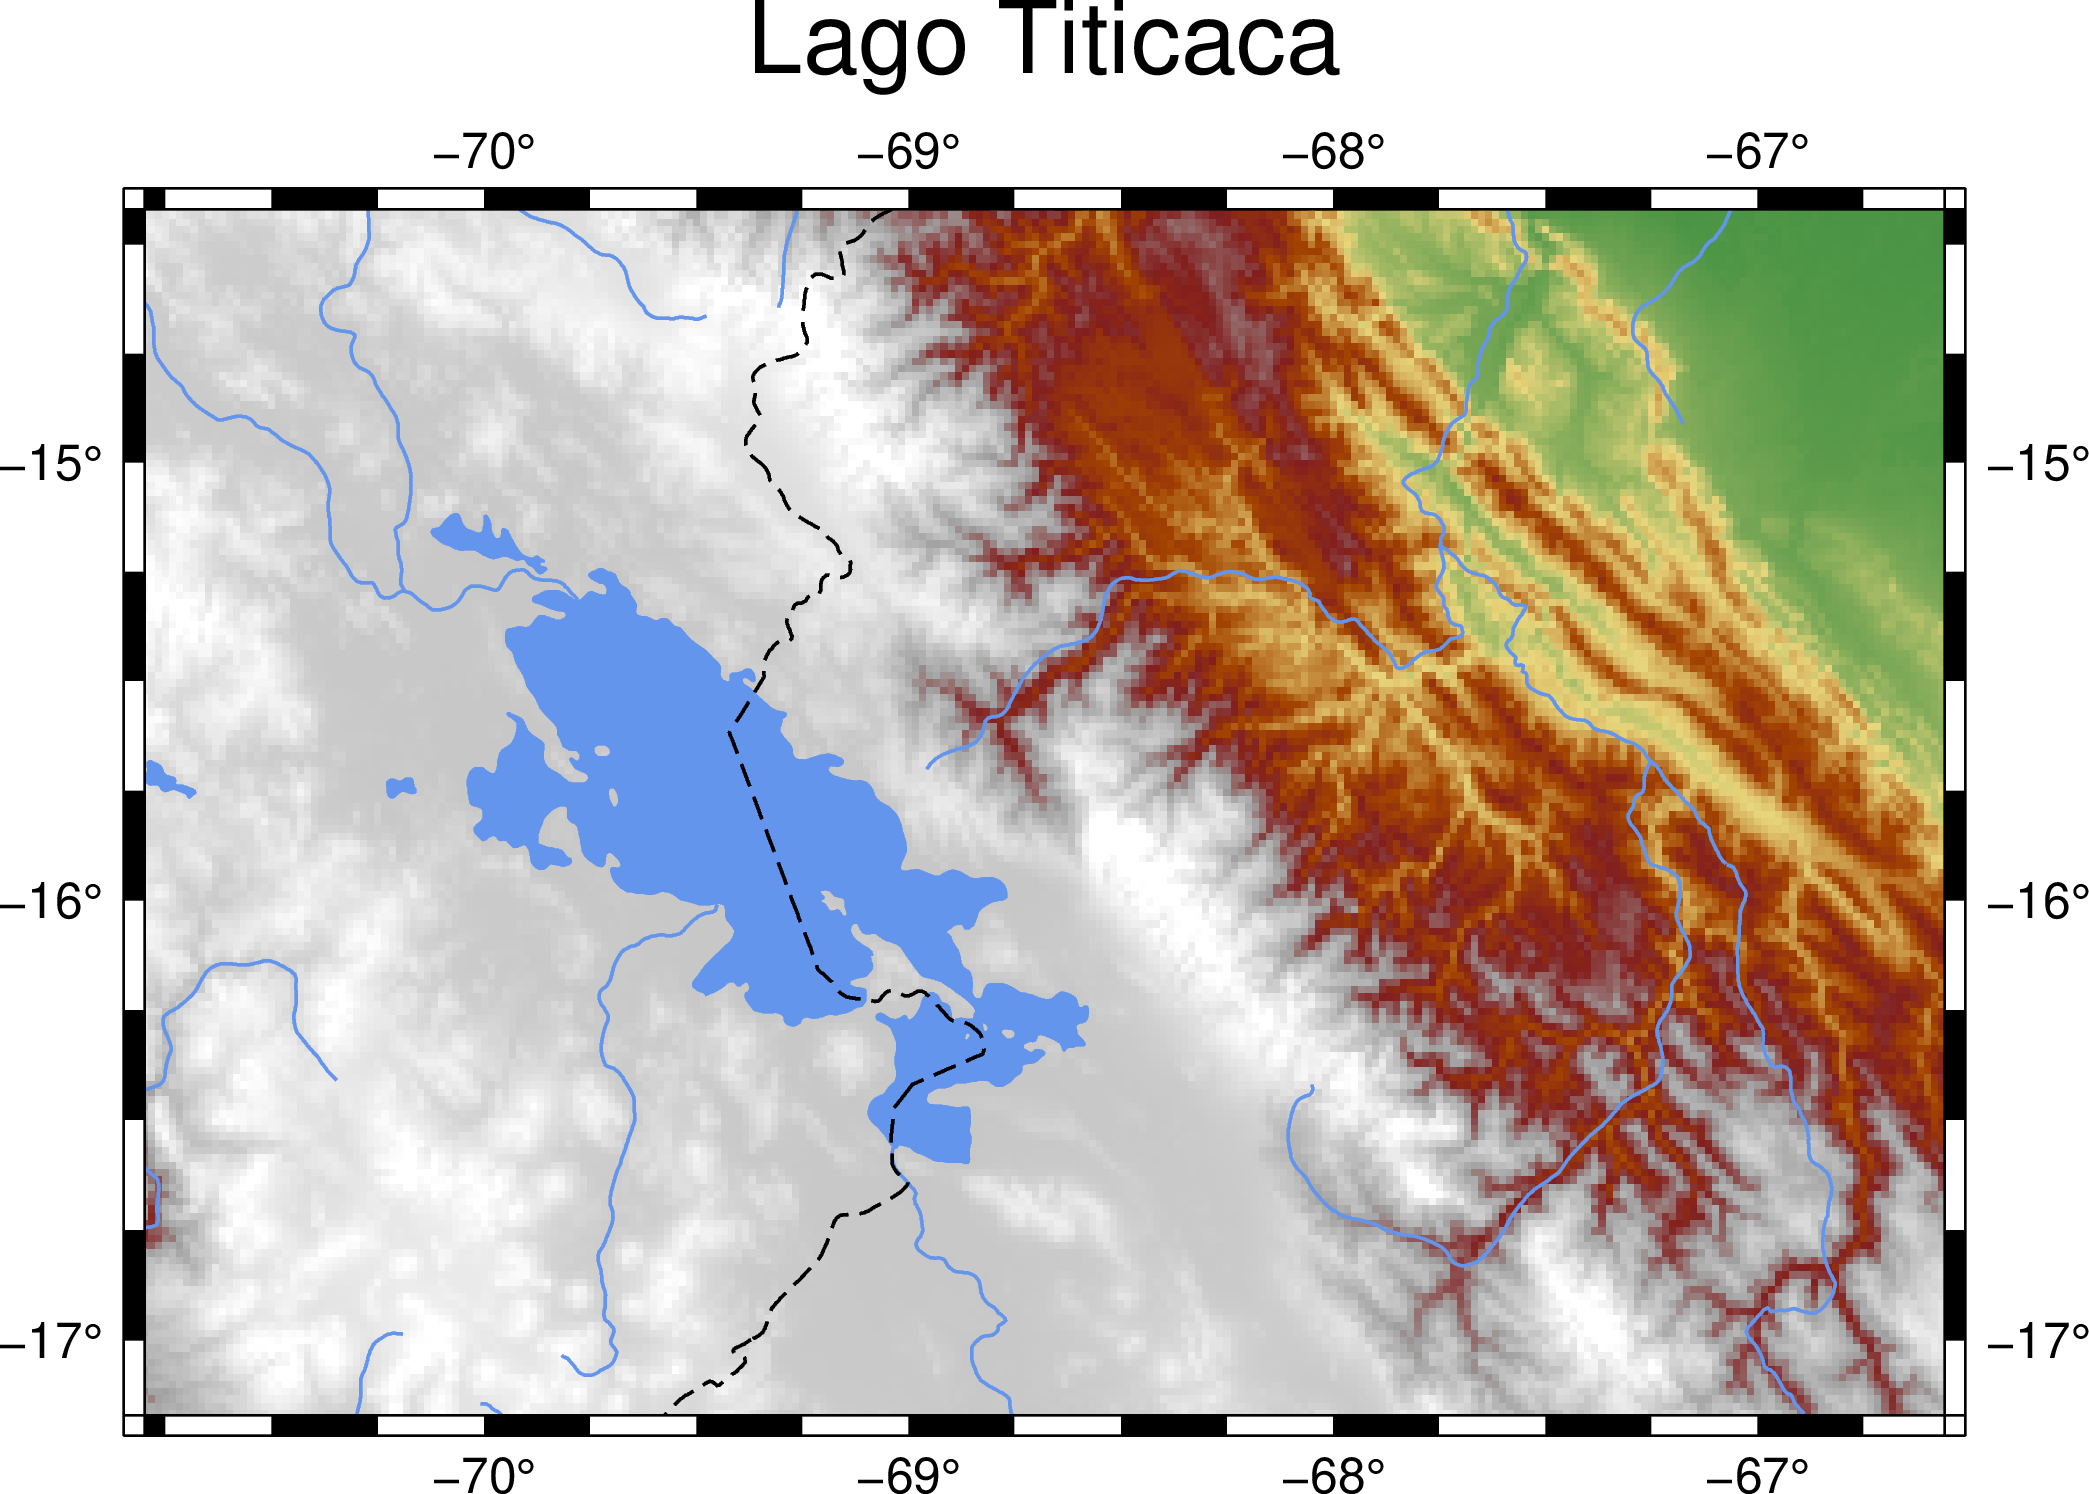 ../_images/titicaca_gmt6.png